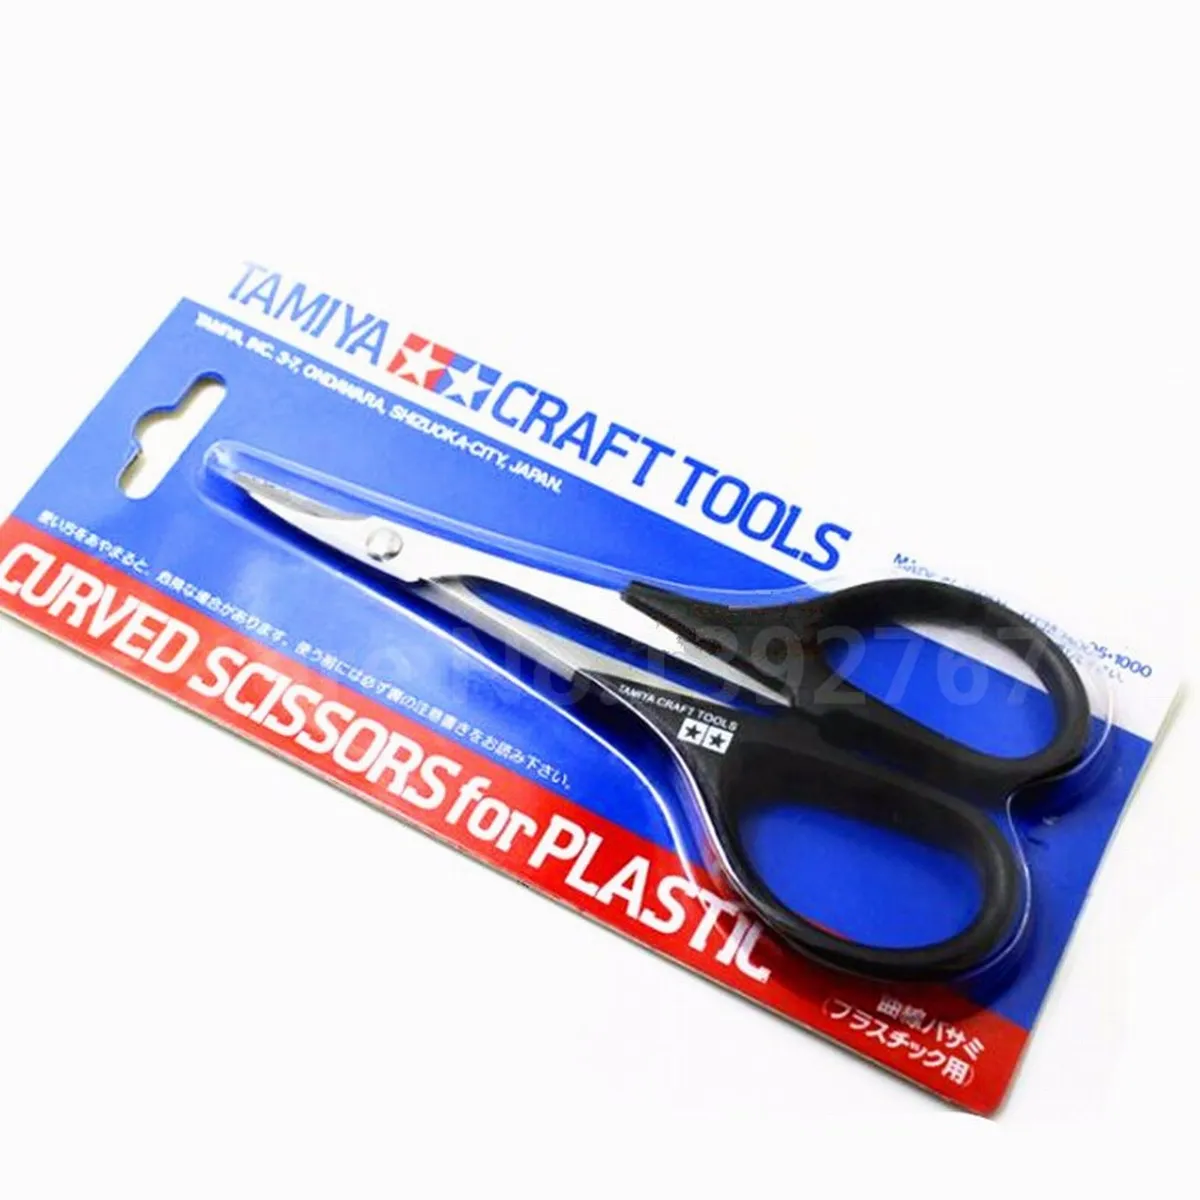 TAMIYA Craft Tools Hard Stainless Steel RC Car Scissor 74005 RC Vehicle Boat Body Shell Bodyshell Curved Scissors For Plastic